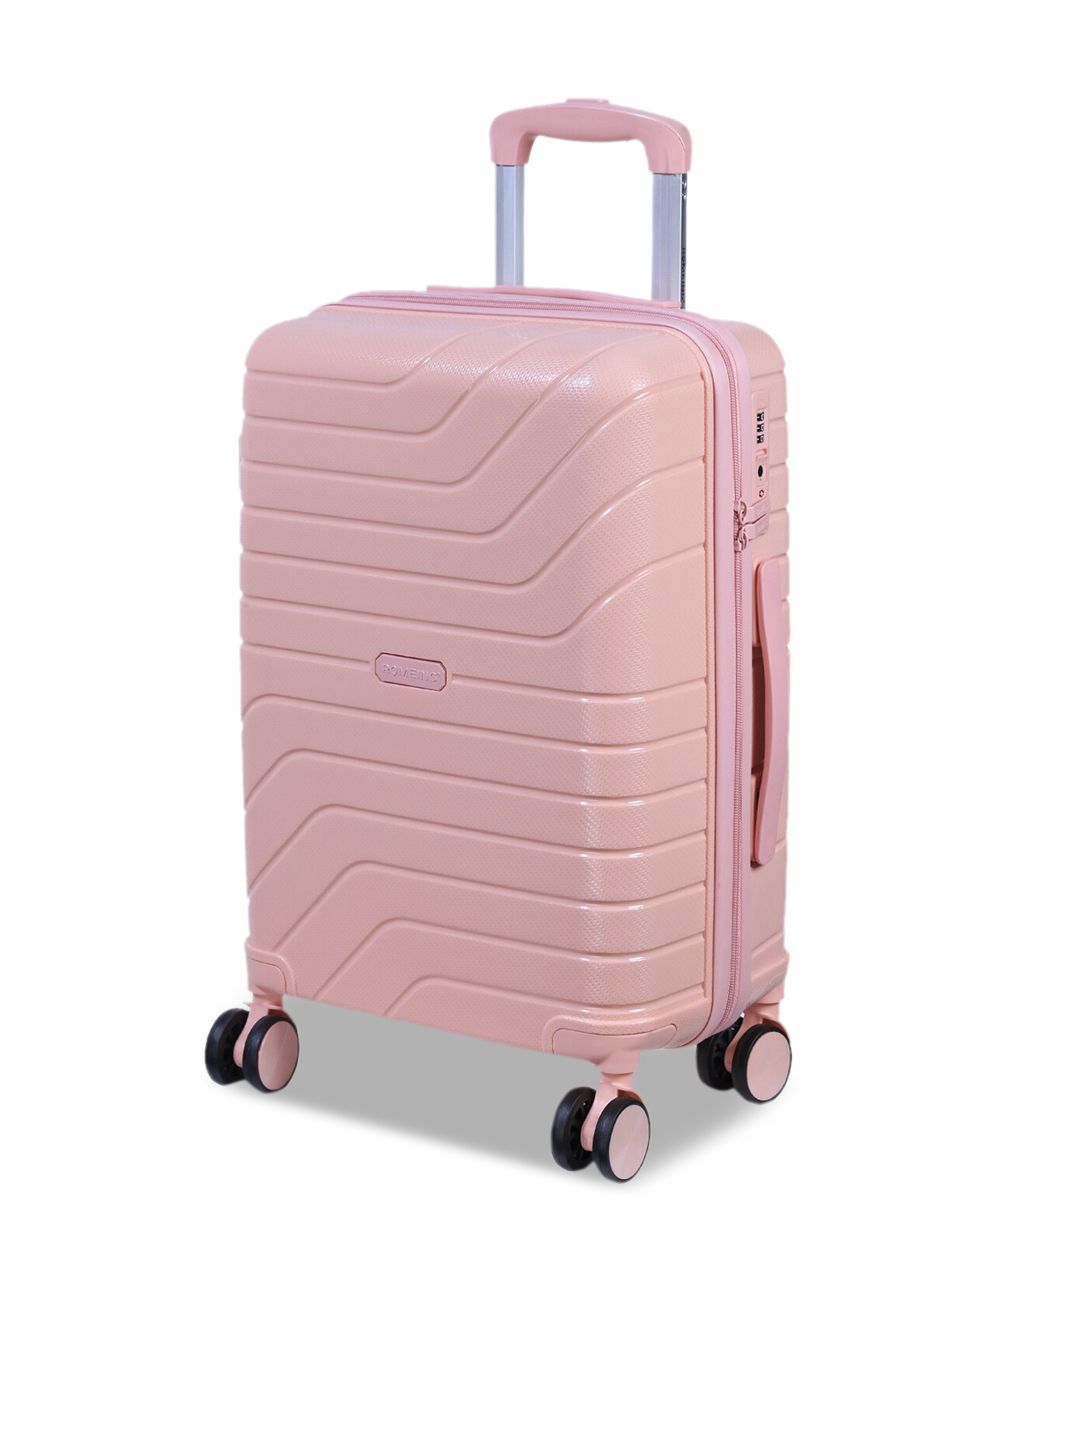 ROMEING Tuscany Pink Textured Hard-Sided Polypropylene Cabin Trolley Suitcase Price in India